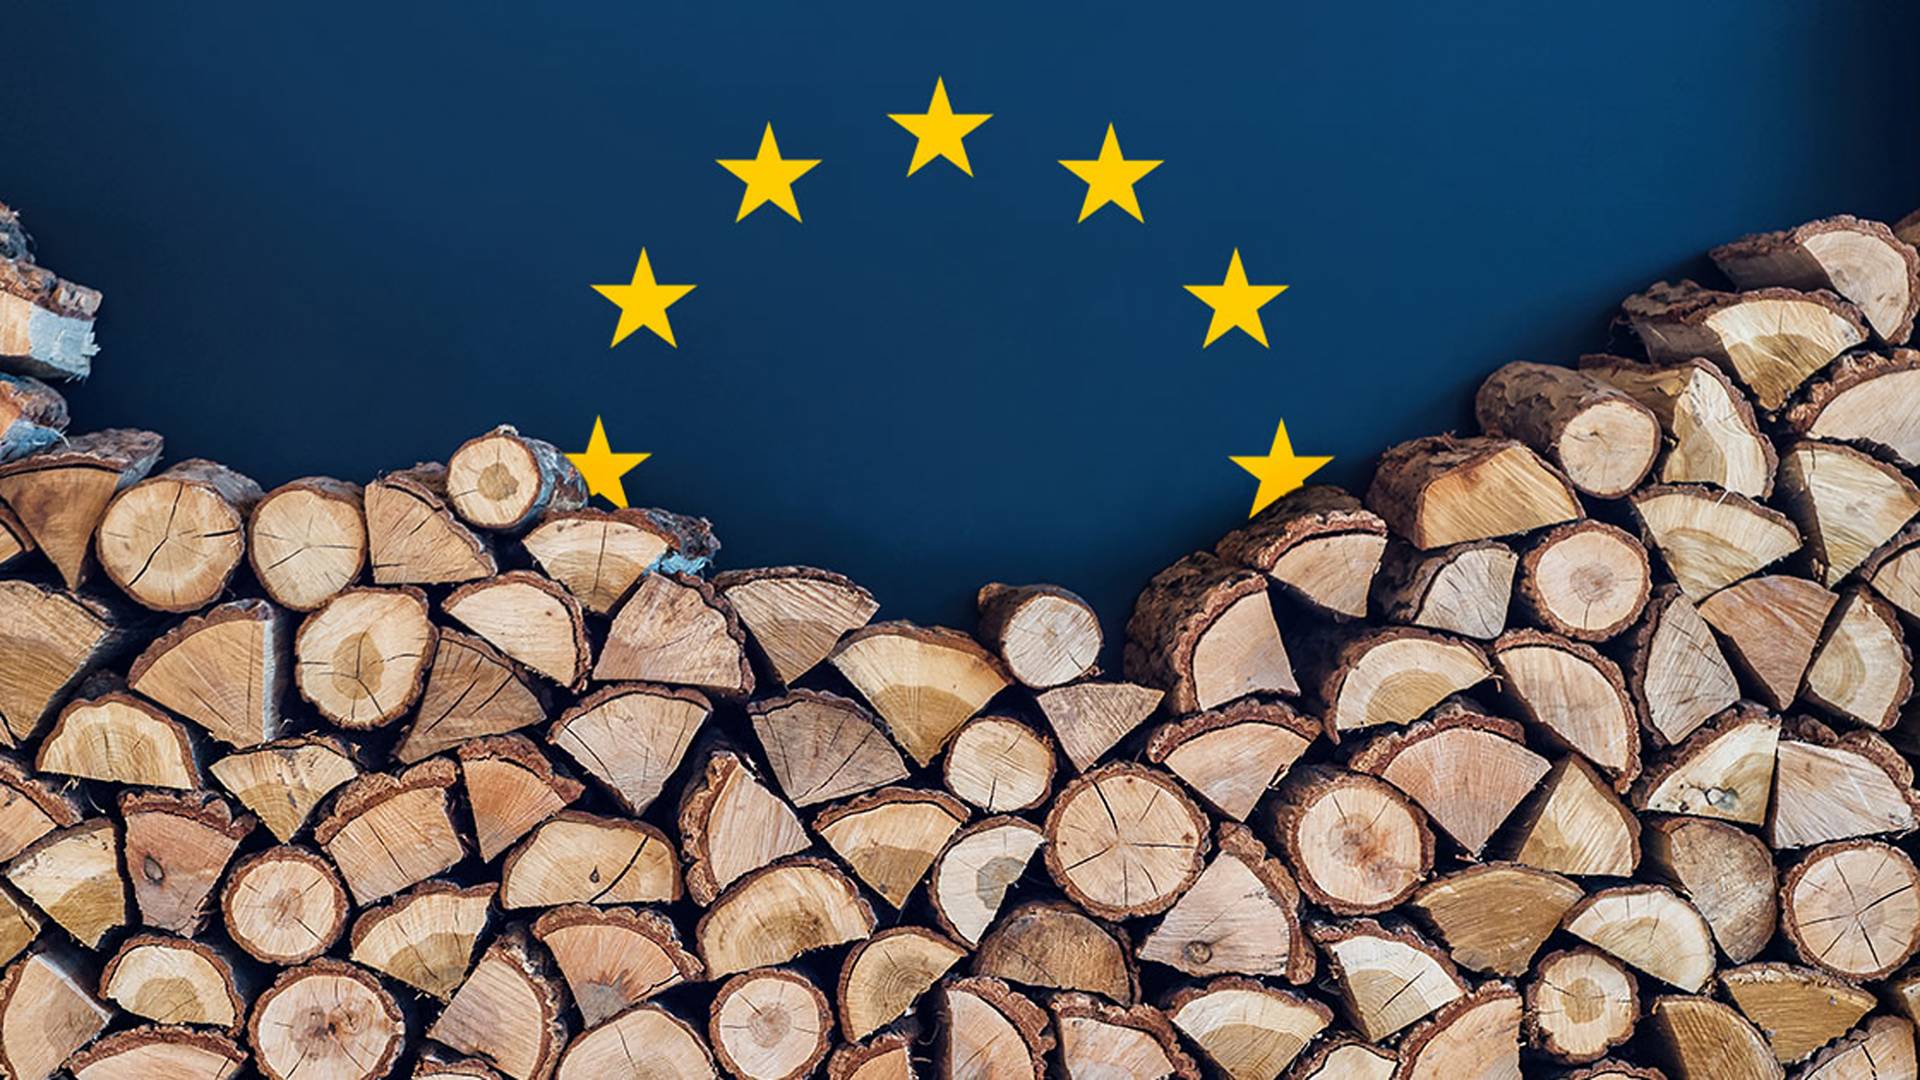 Chopped wood in a pile in front of the flag of Europe